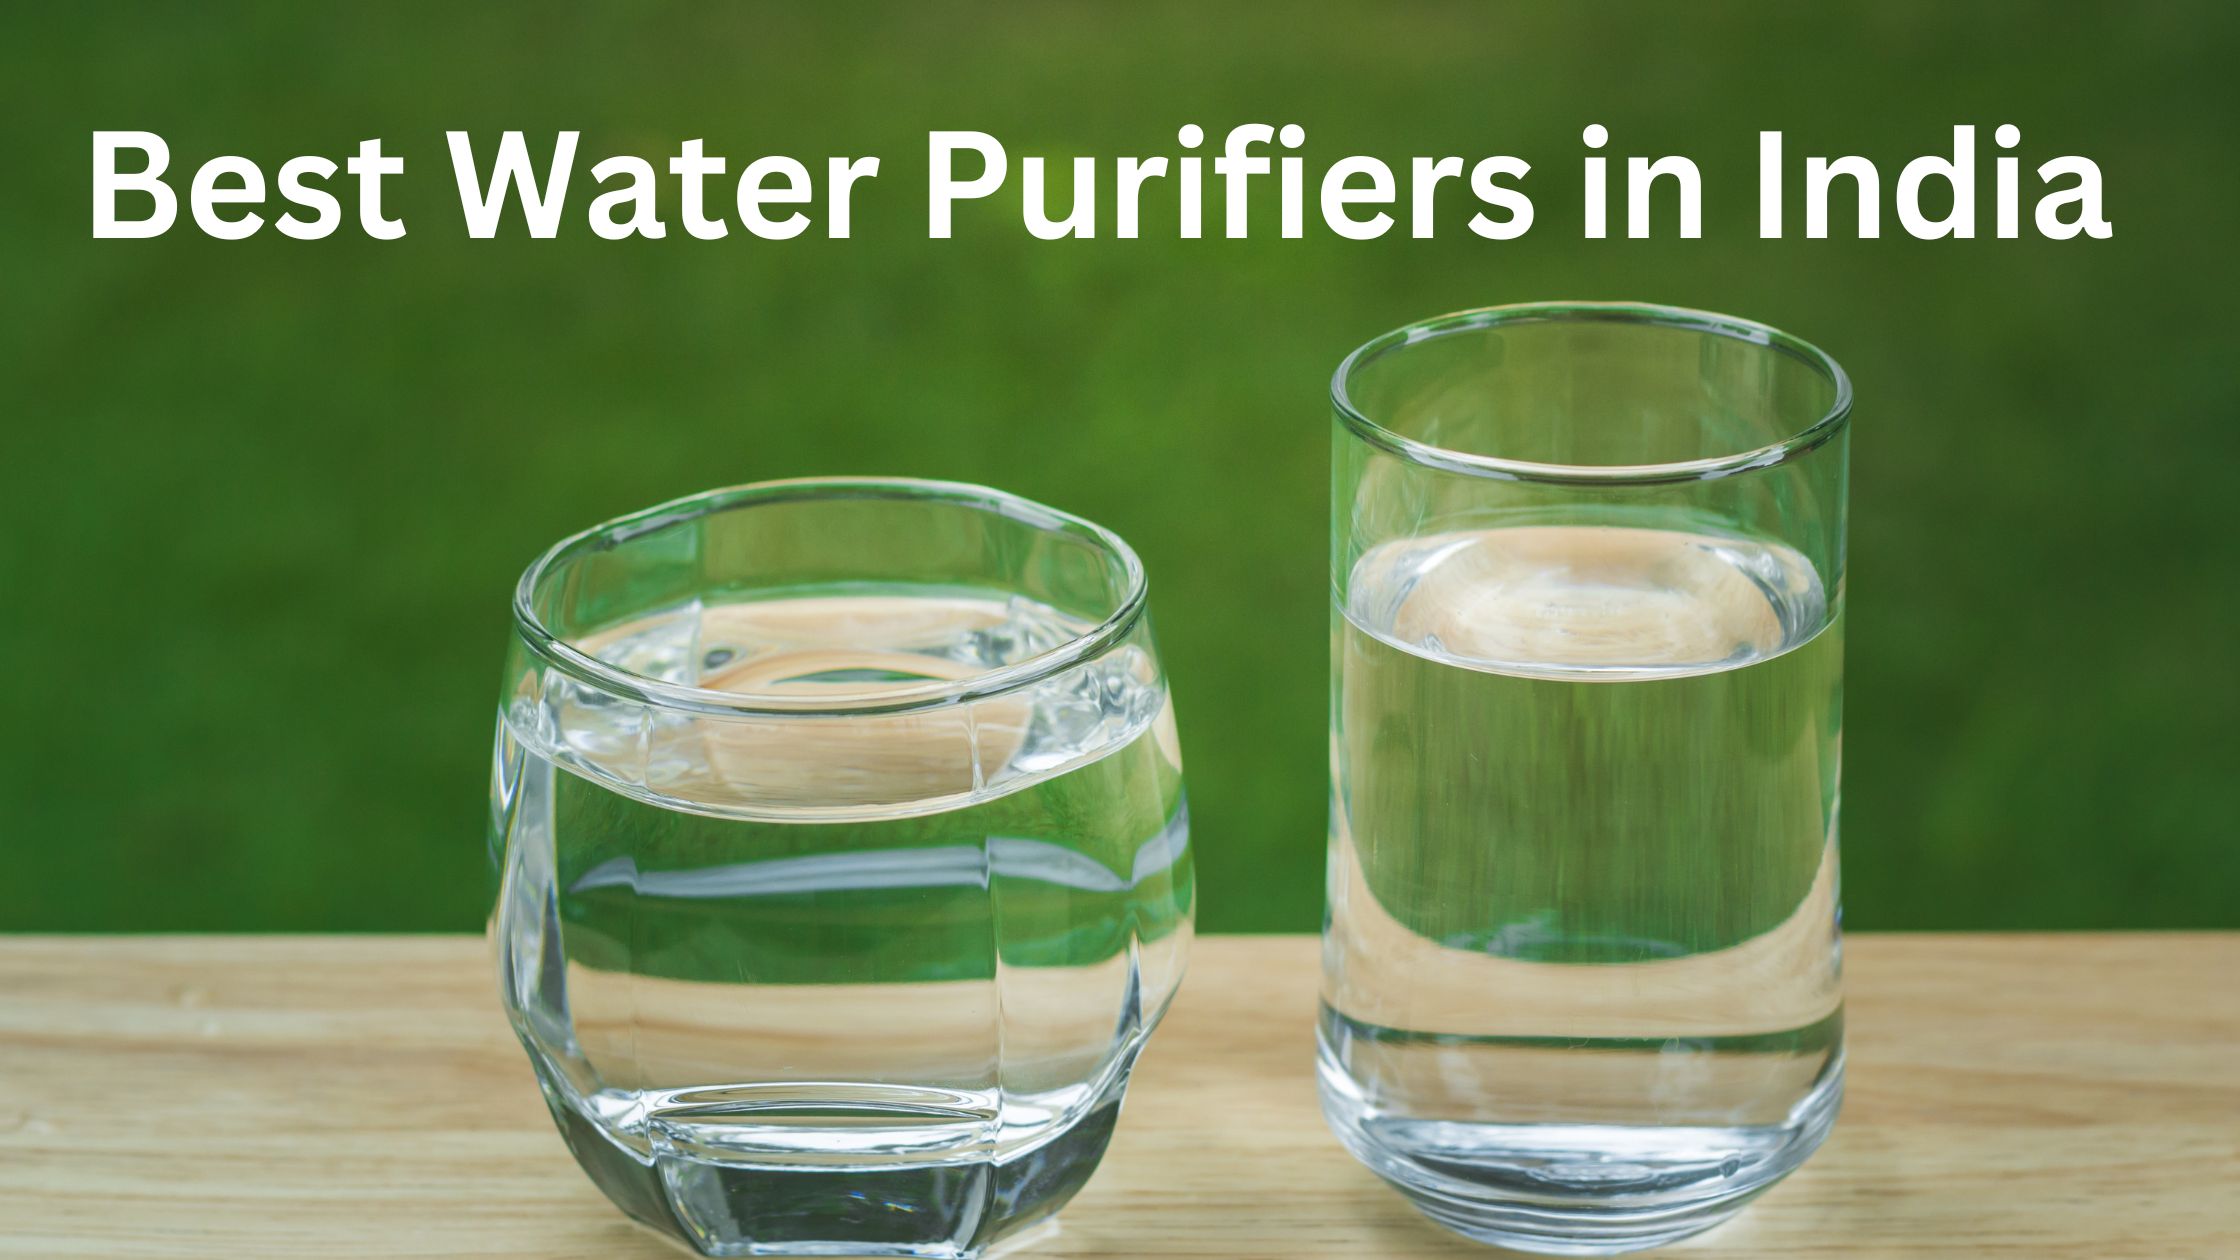 List of best water purifiers in India for Home and office